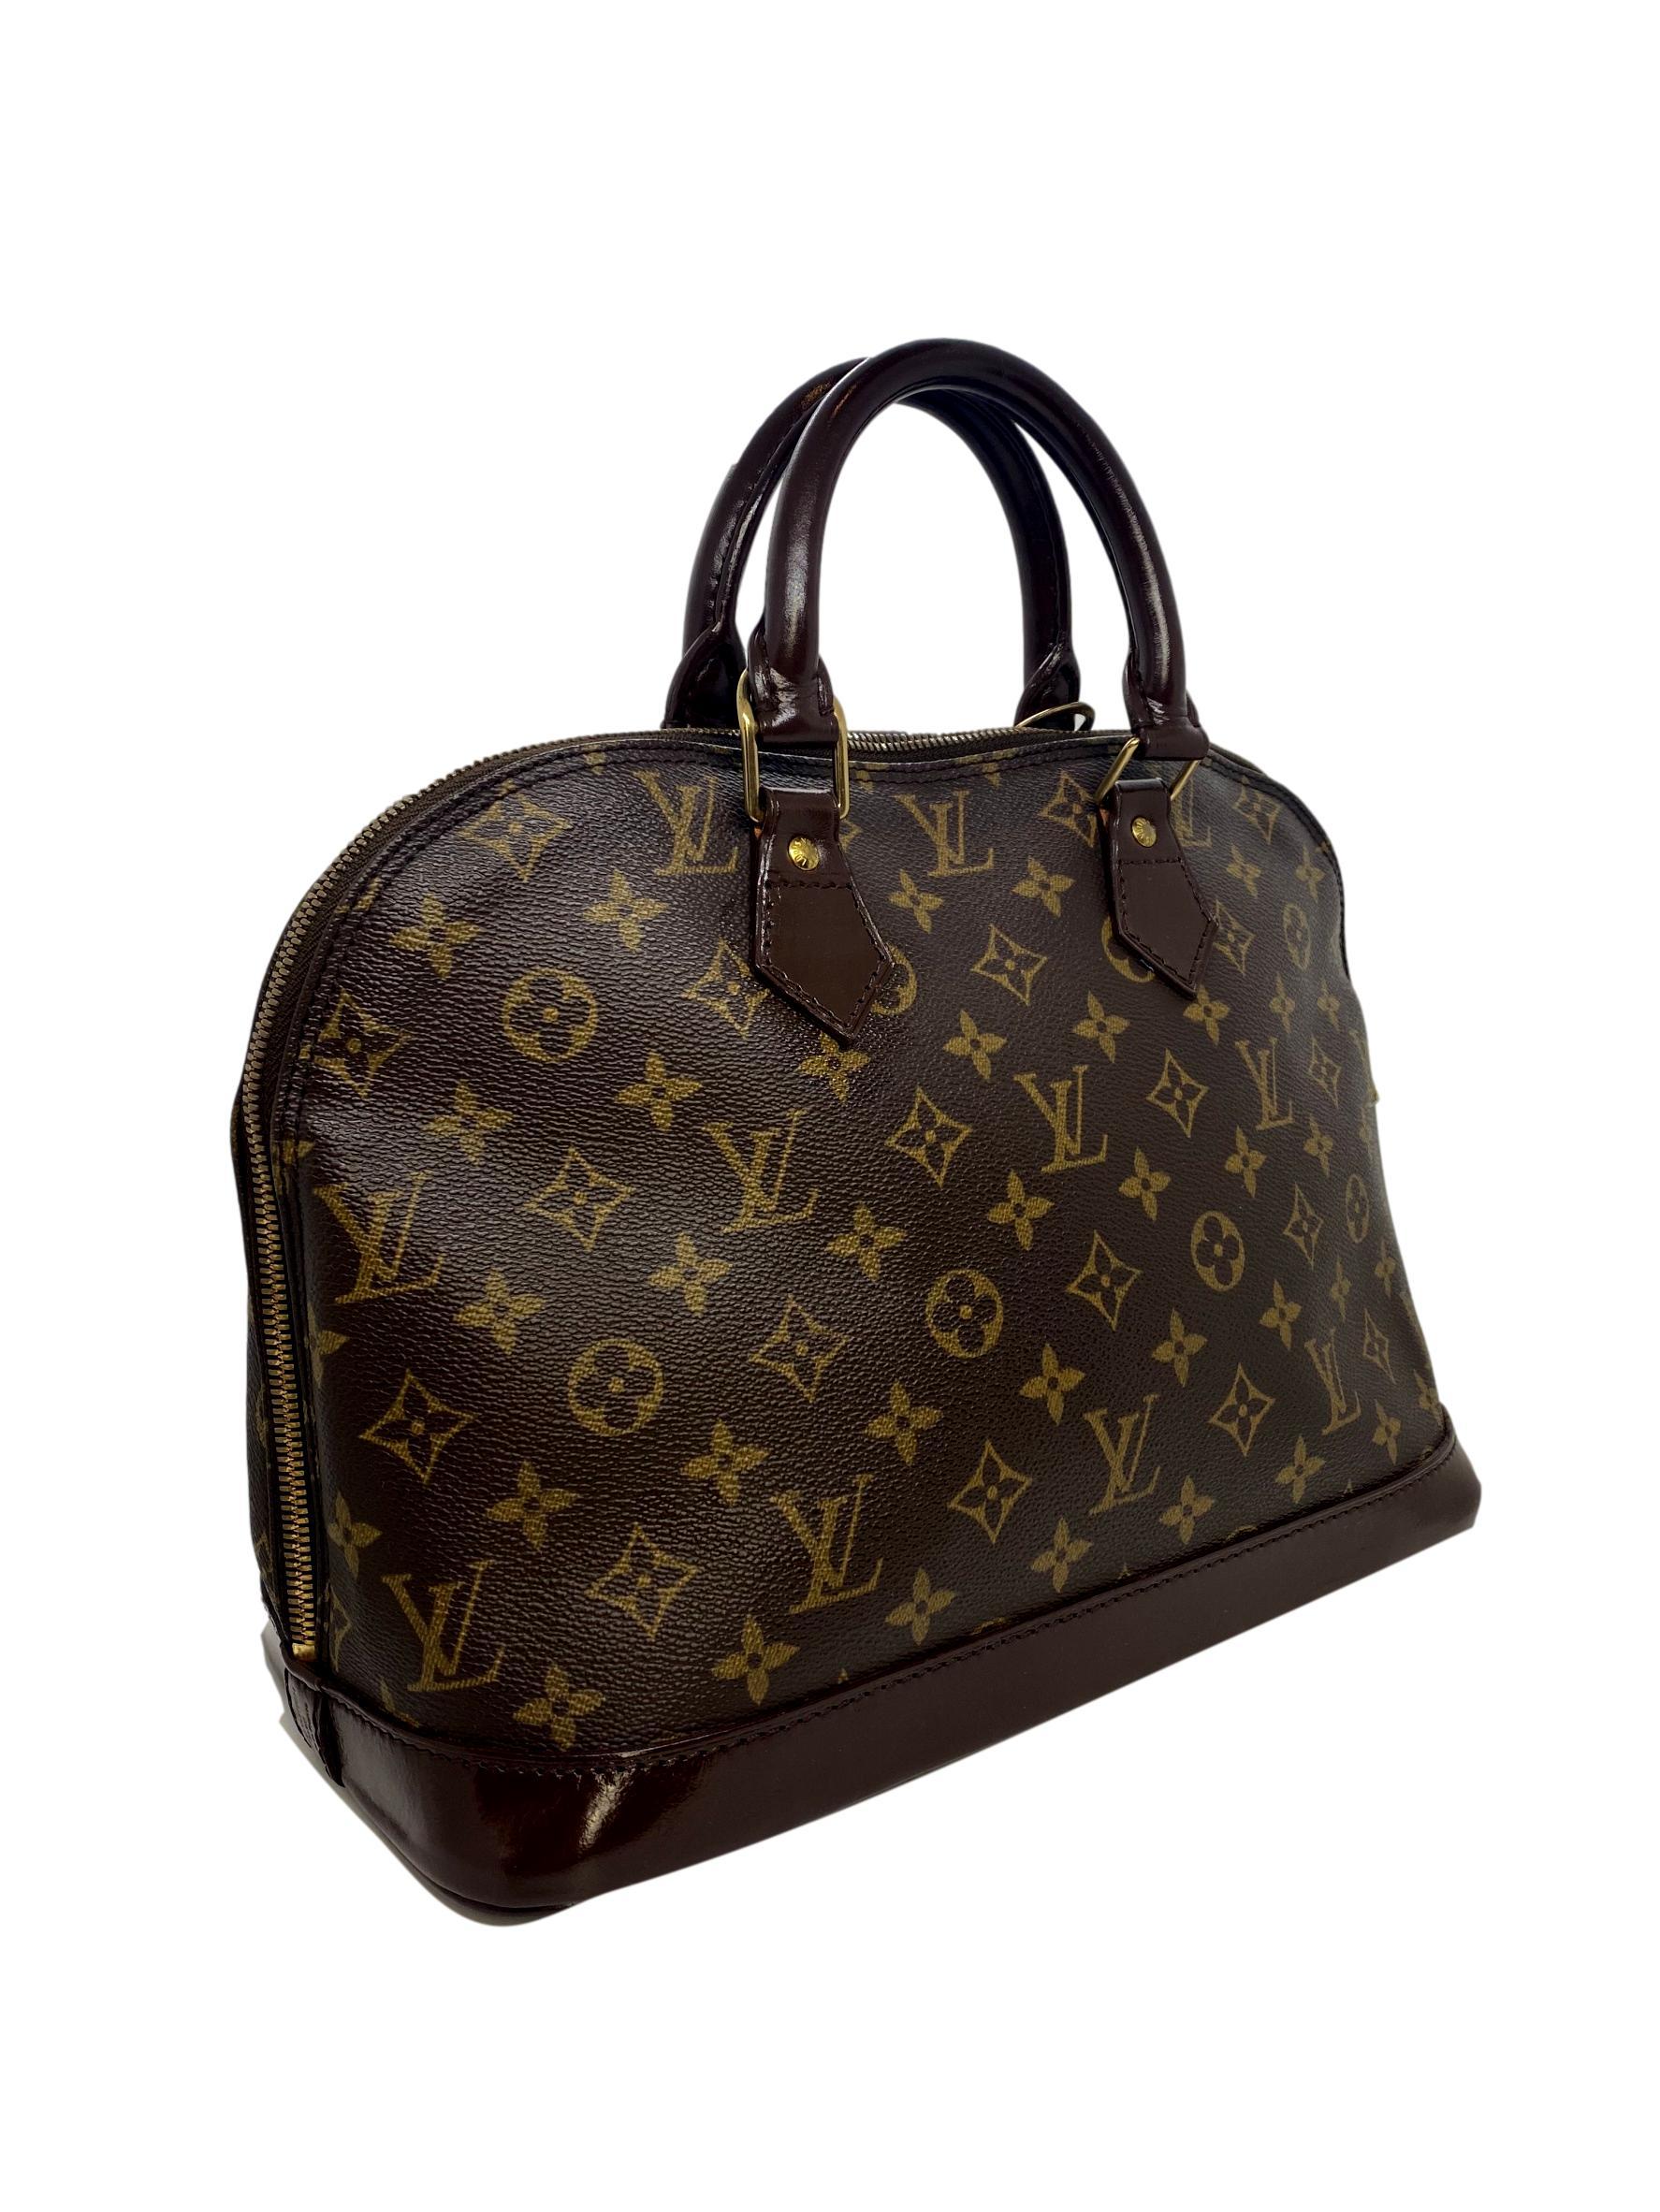 The Louis Vuitton Alma is a classic closet staple, first introduced and inspired by the architect of  the Art Deco era of the early 1930's. Originally designed by Gaston-Louis Vuitton, the bag was originally named “Champs-Elysées” after the famous